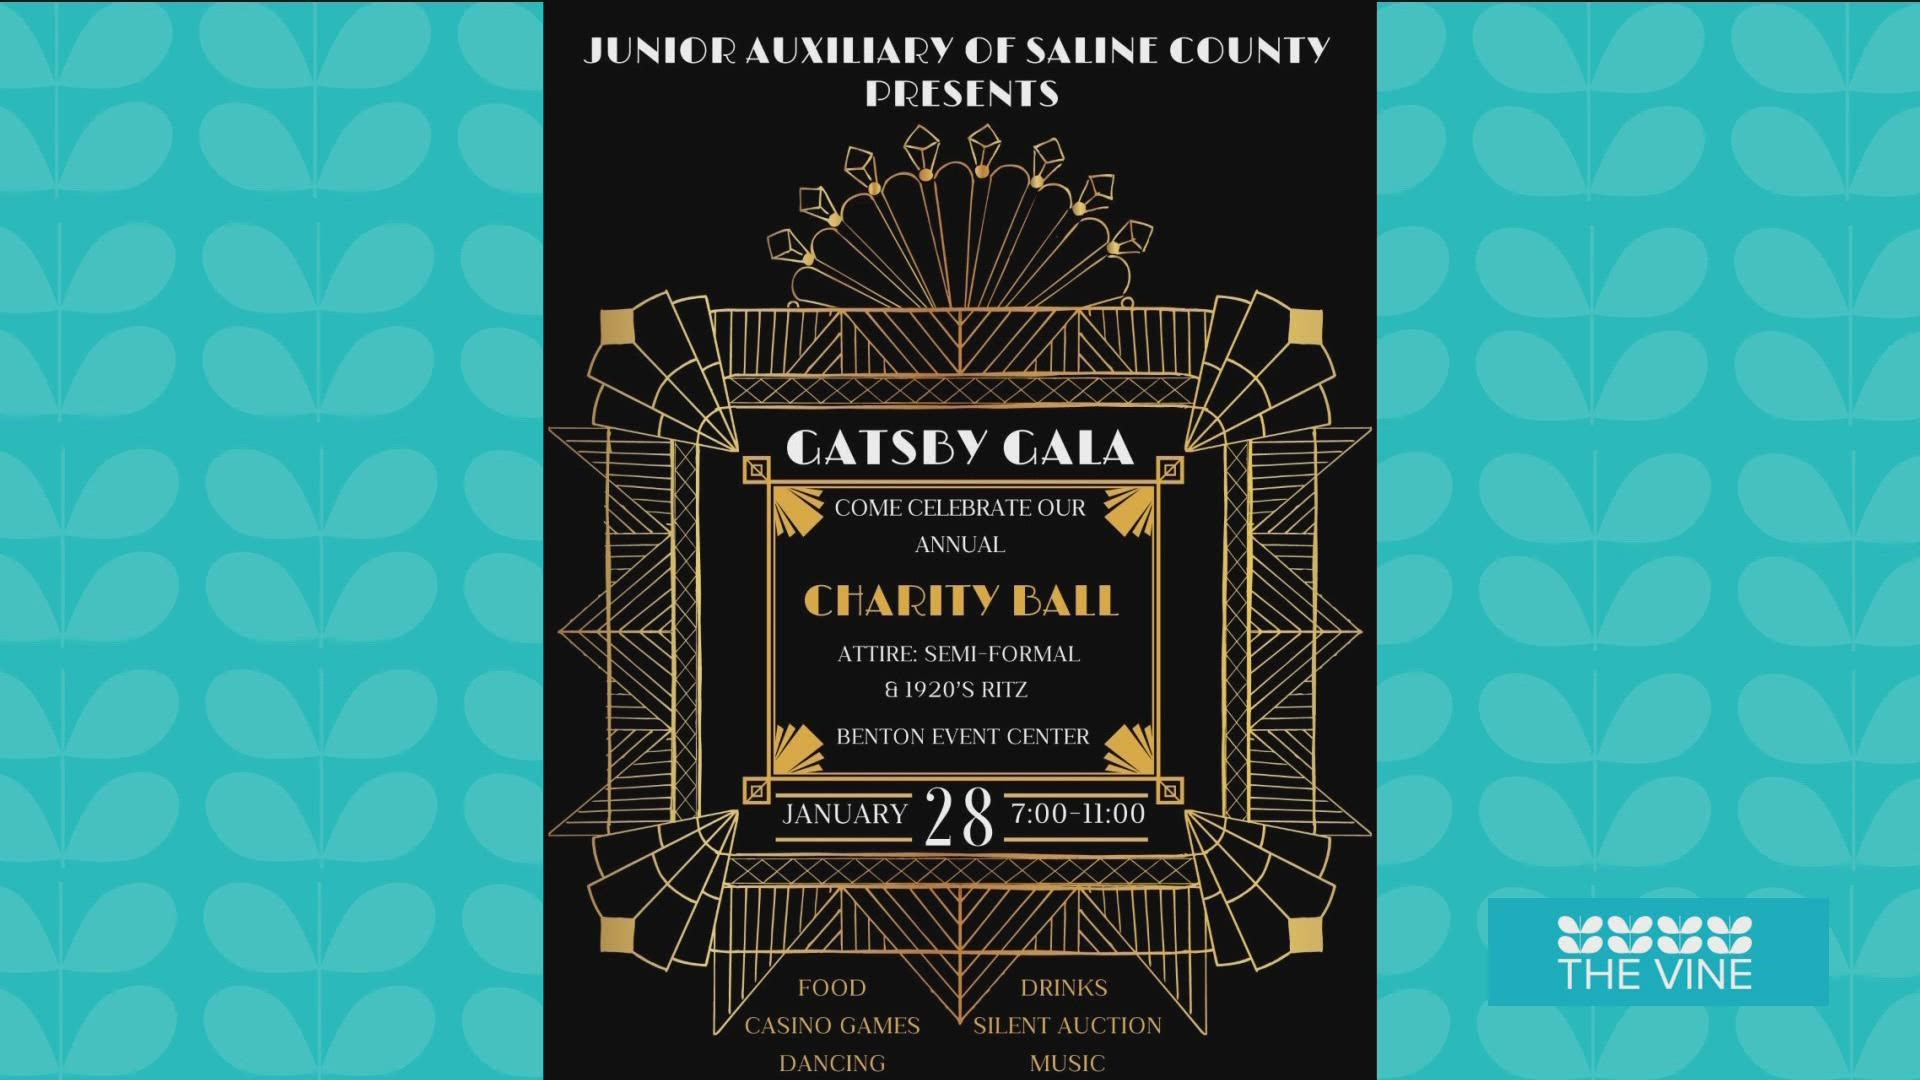 Learn more at give.hellofund.com/JASalineCharityBall